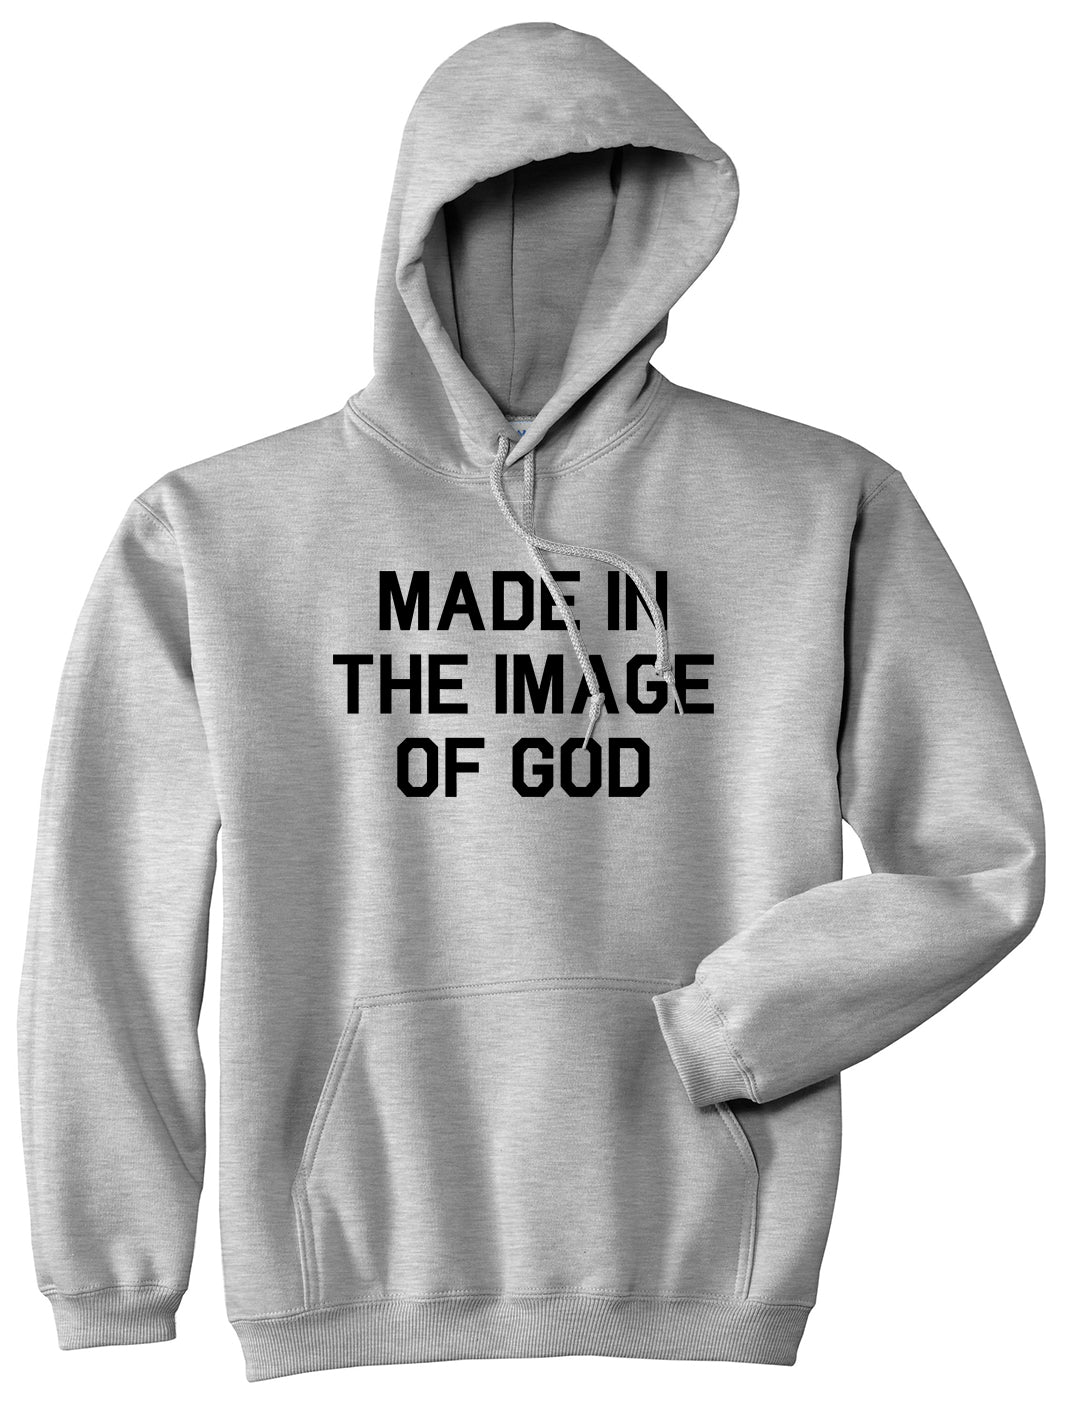 Made In The Image Of God Mens Pullover Hoodie Grey by Kings Of NY